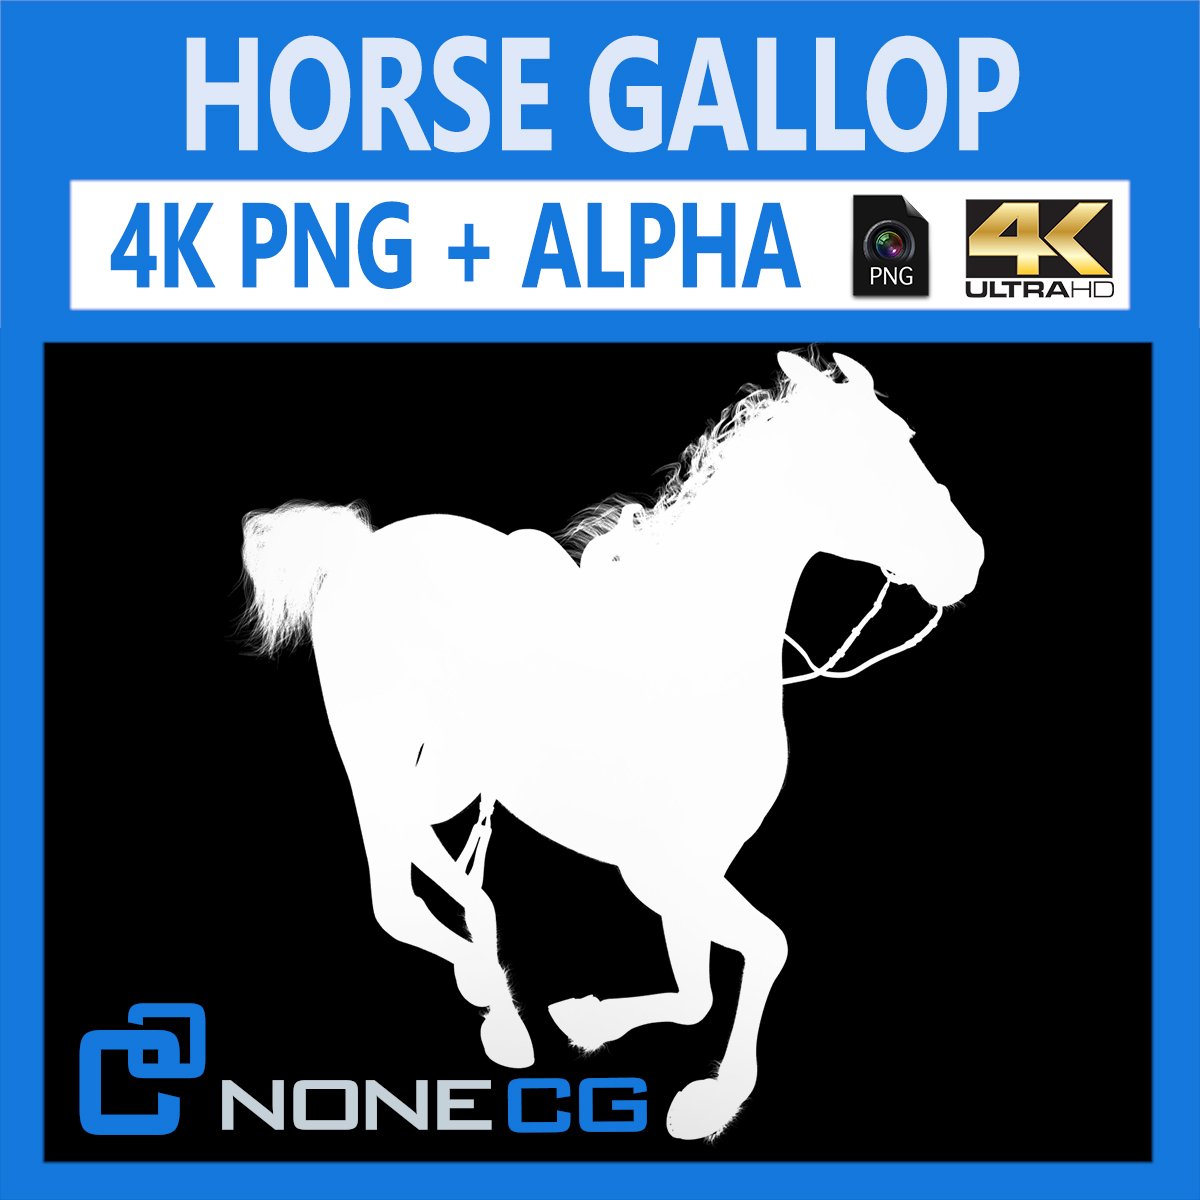 ▷ 3D Horse Gallop Silhouette » Download and buy 3D profestionnal models on  